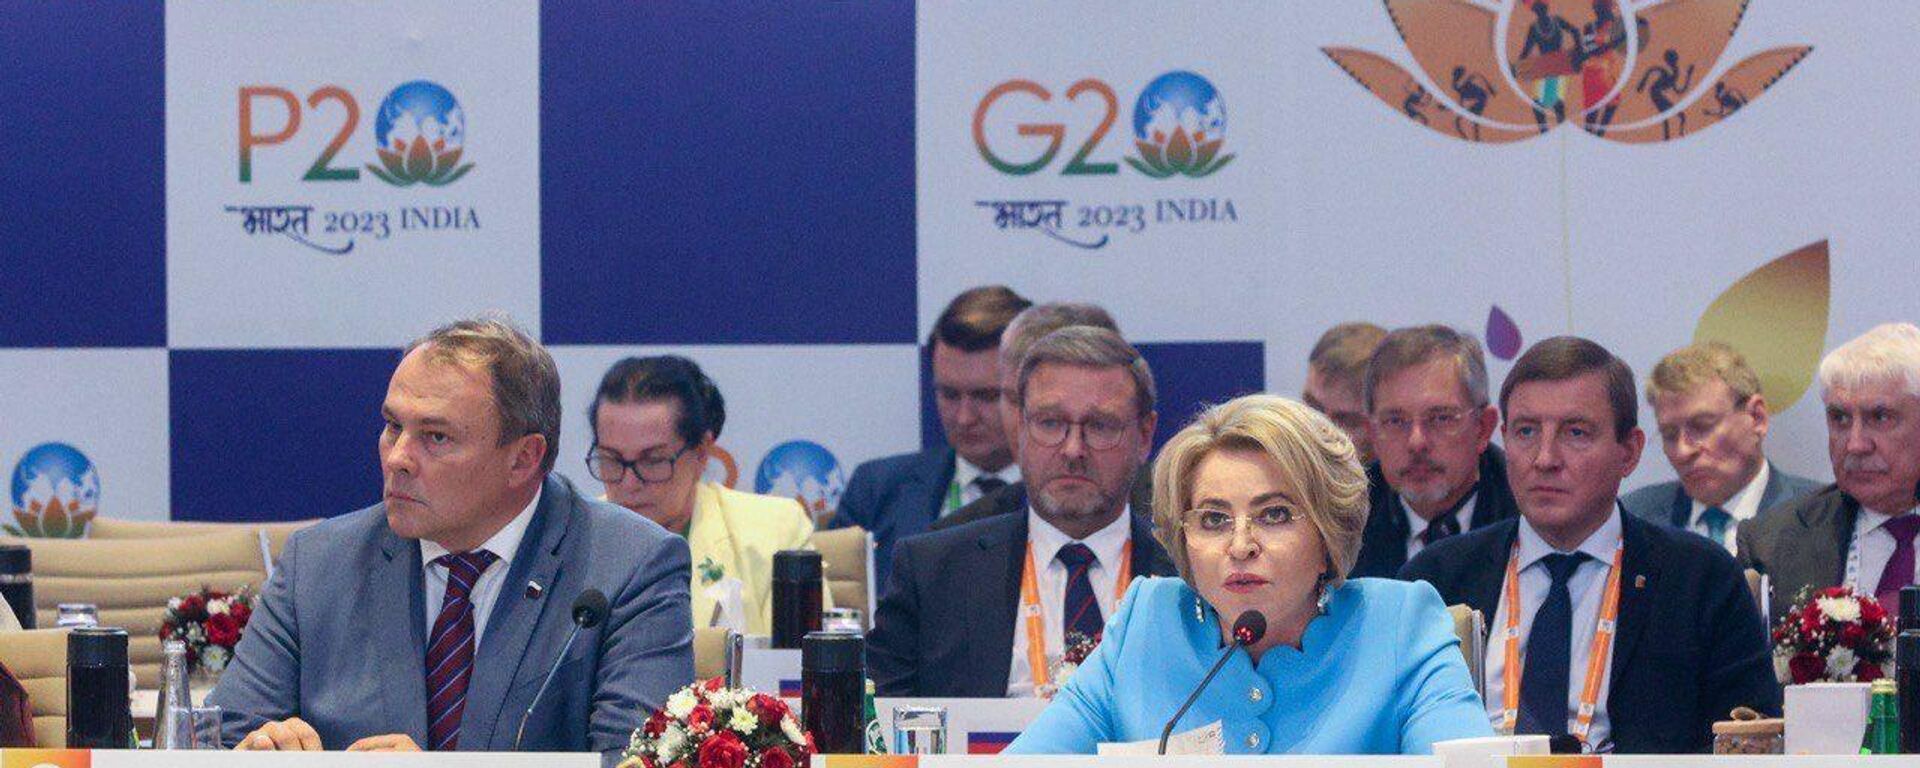 Delegation of the Russian parliament led by Valentina Matvienko is visiting India from October 12 to 14 to participate in the parliamentary forum (P20) of the G20 countries - Sputnik India, 1920, 14.10.2023